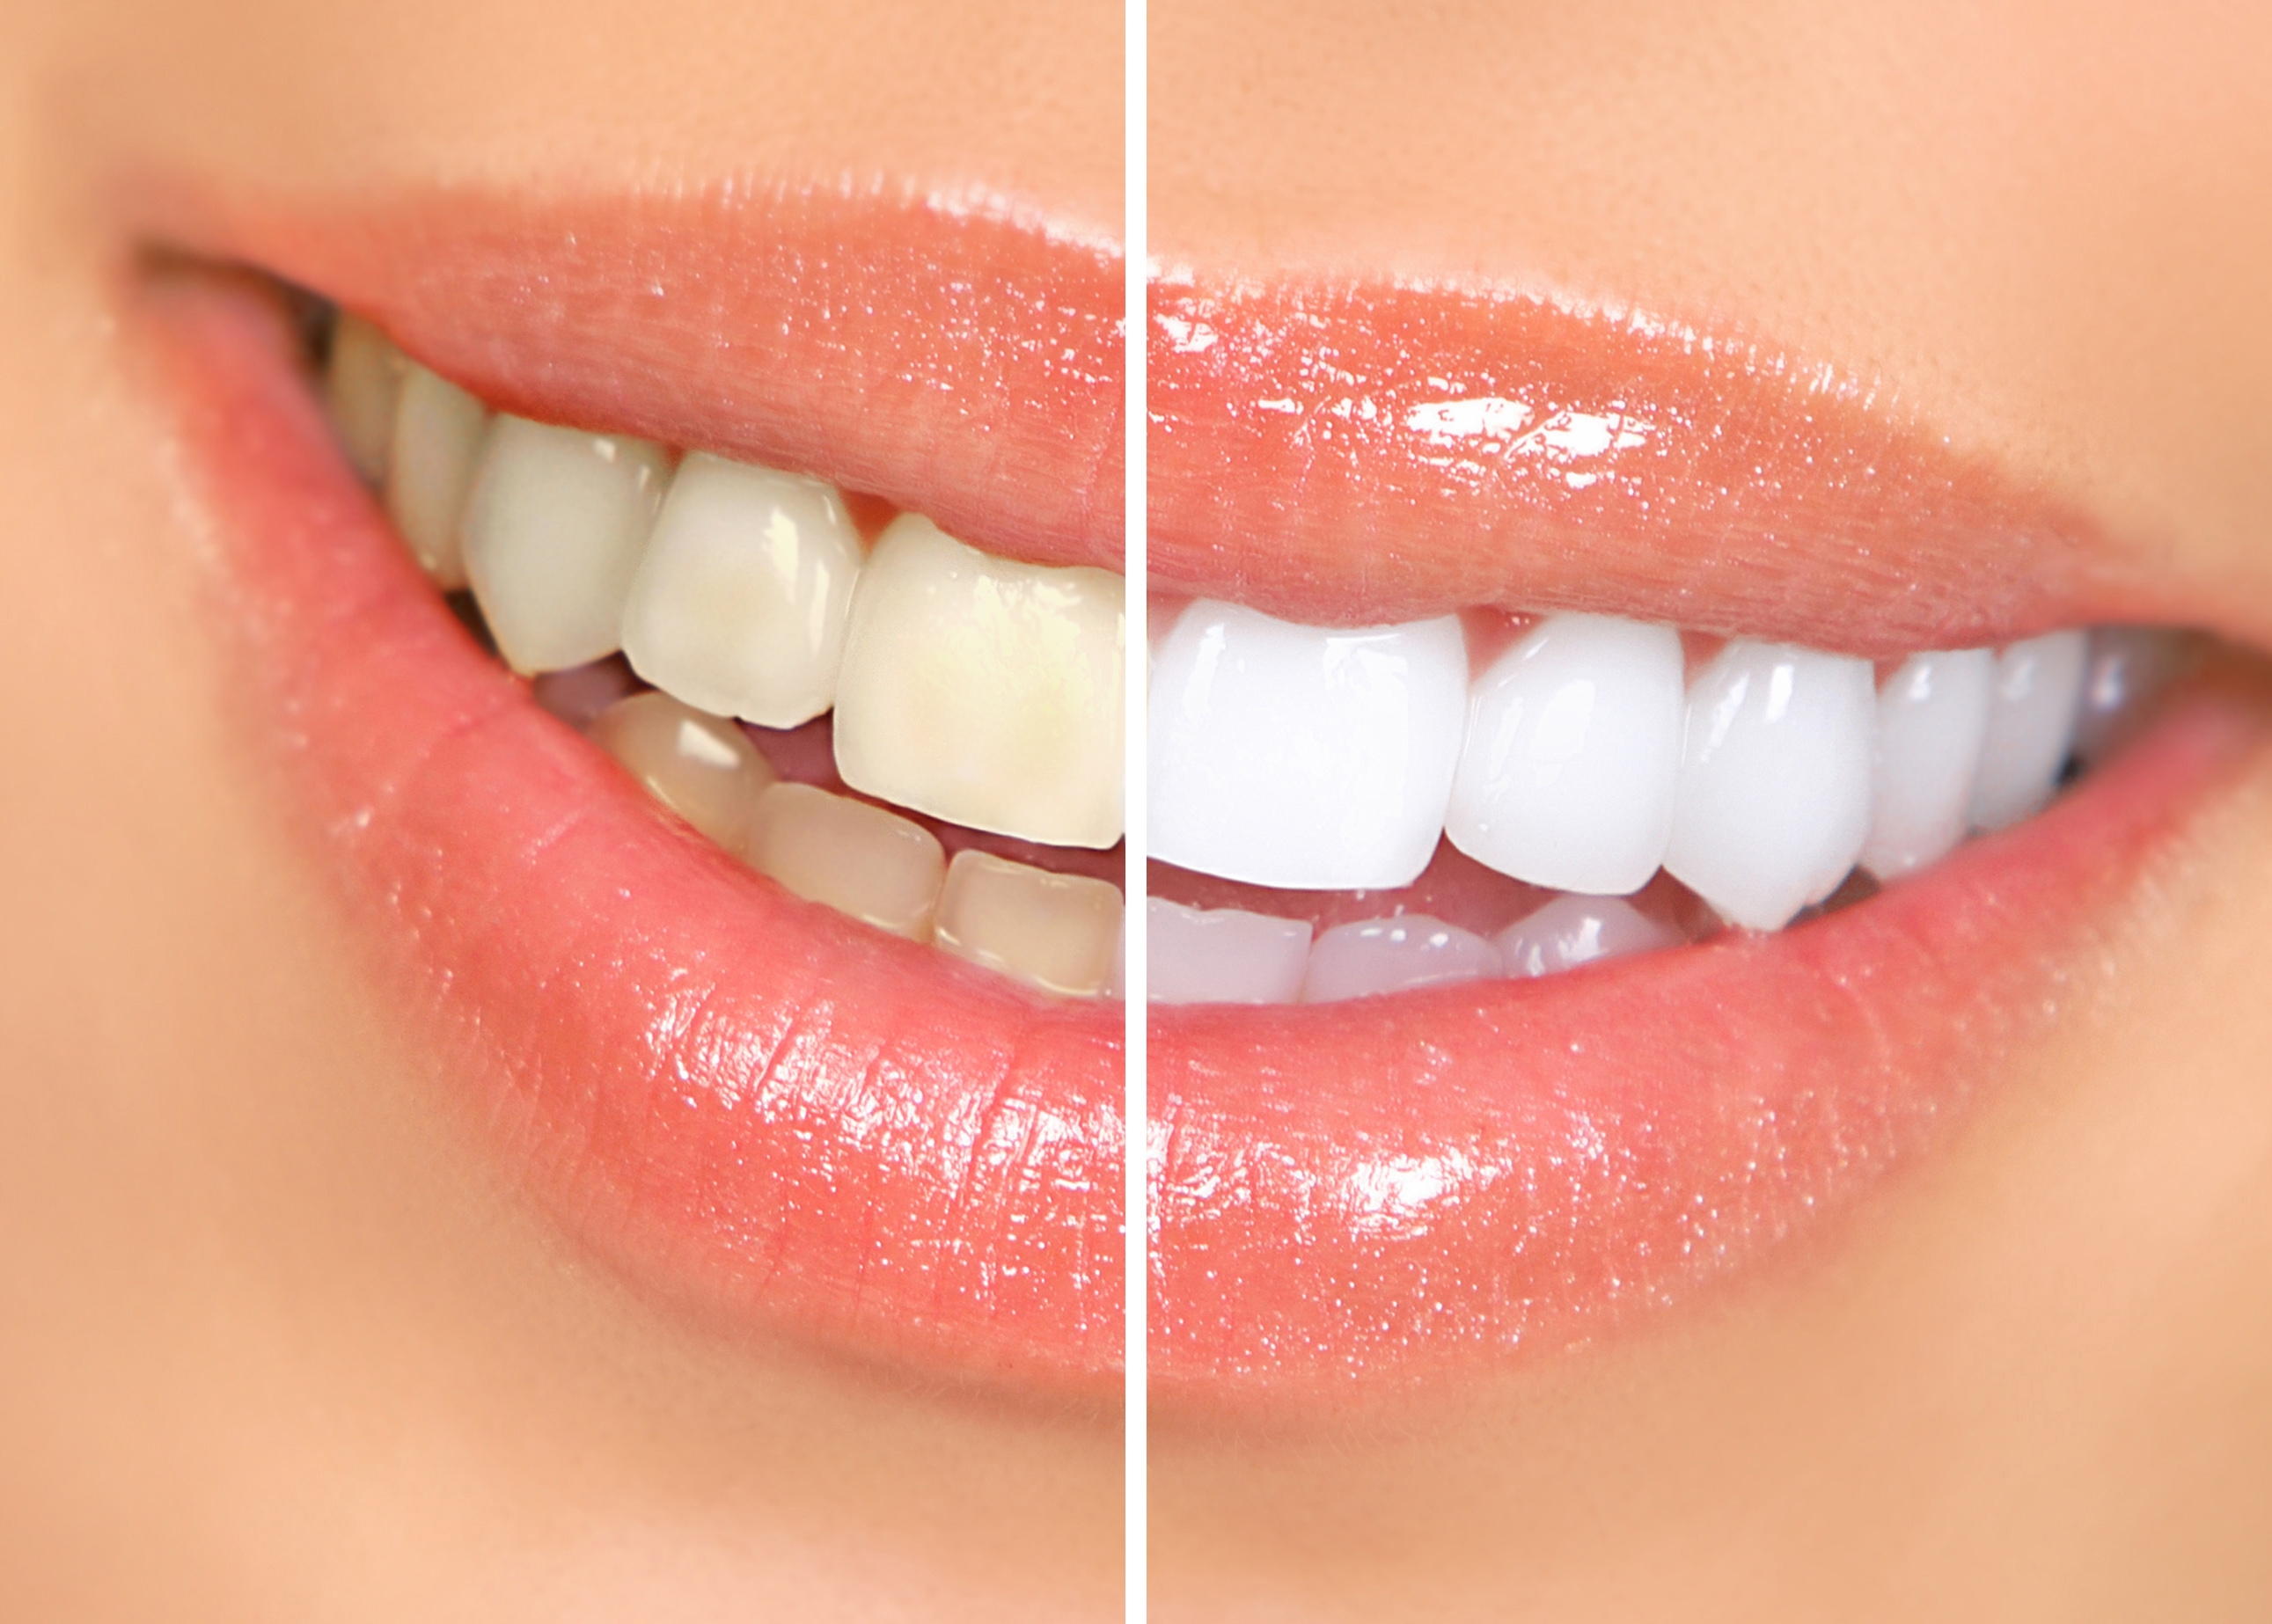 We are the best dentistry in North Ryde for teeth whitening.